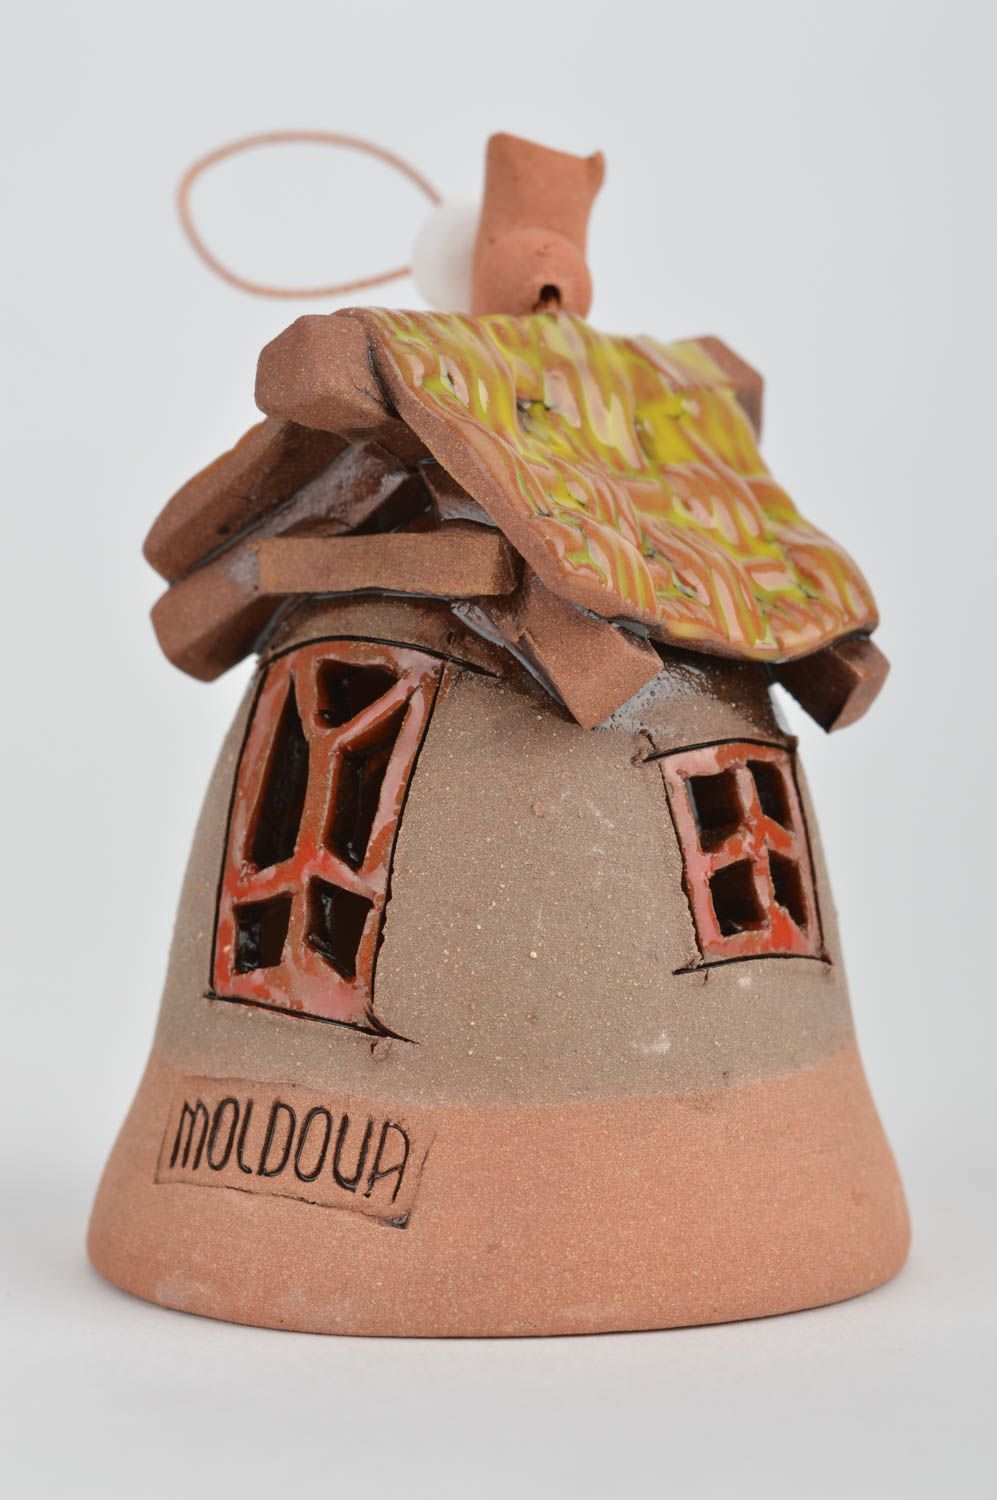 Designer bell-house made of red clay and glazed handmade decorative wall pendant photo 5